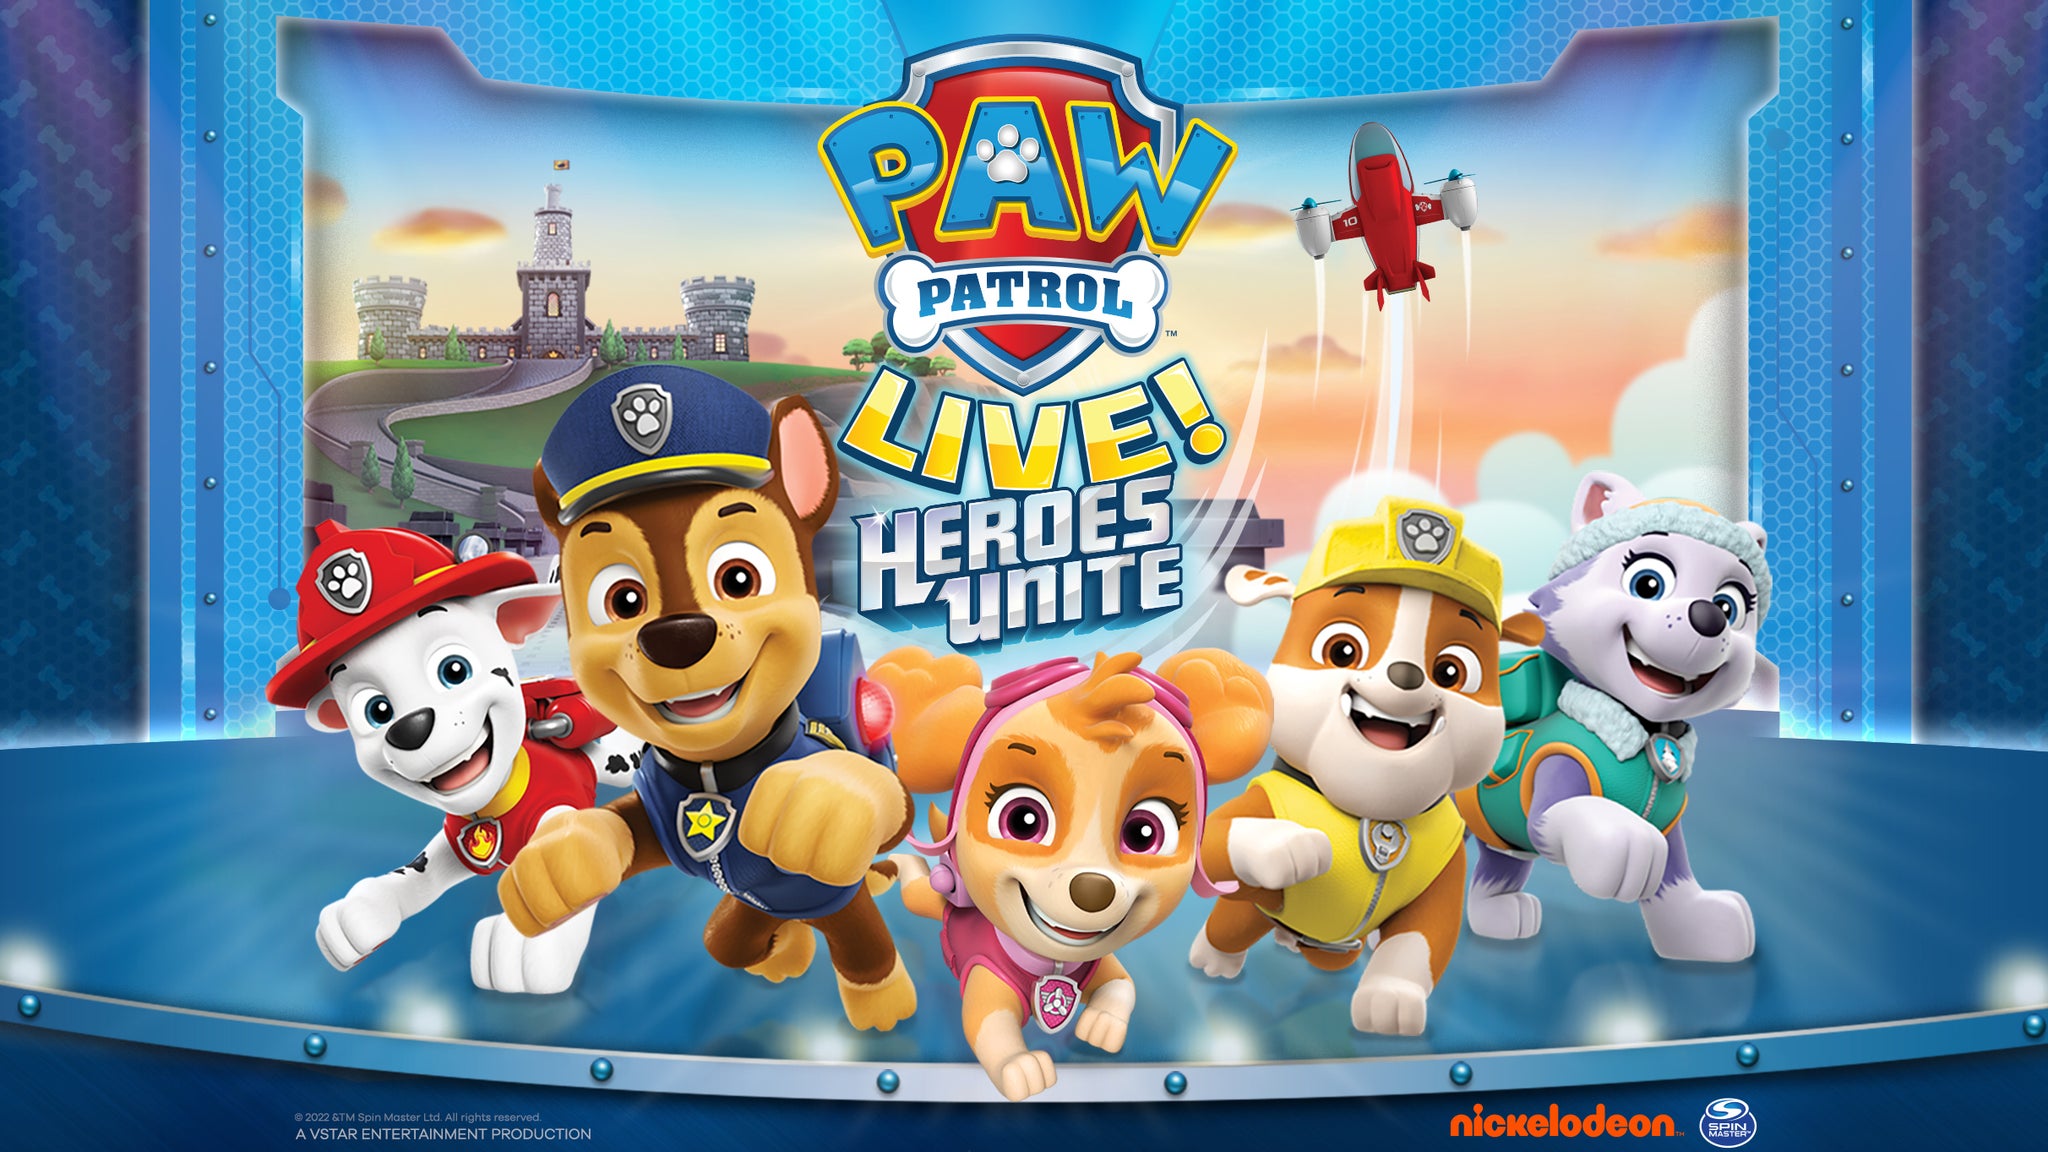 Paw Patrol Live Heroes Unite Tickets Event Dates & Schedule